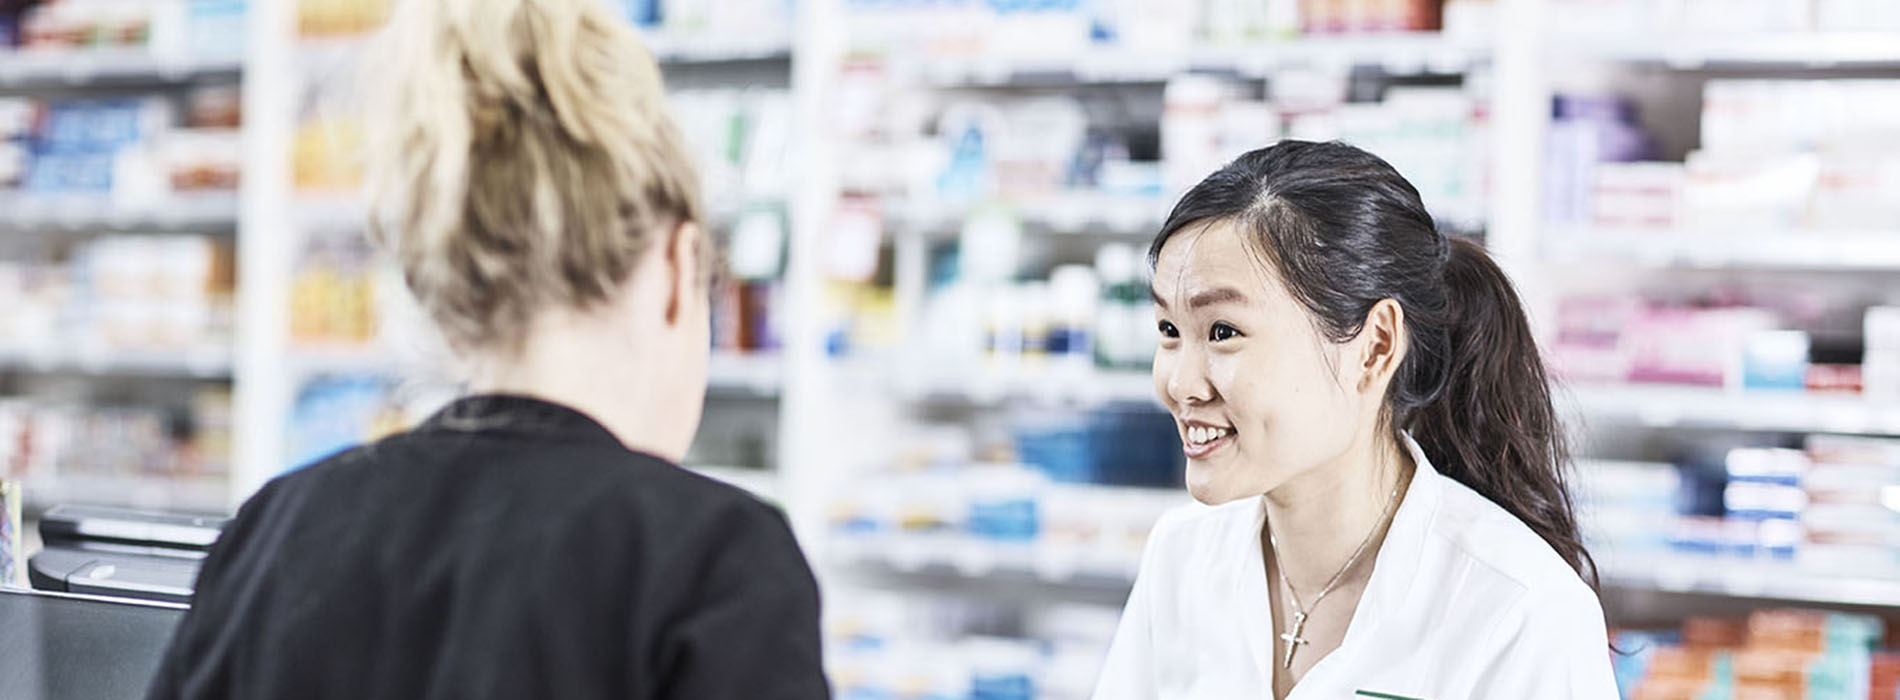 Smiling Pharmacist speaking with a customer at the shop counter